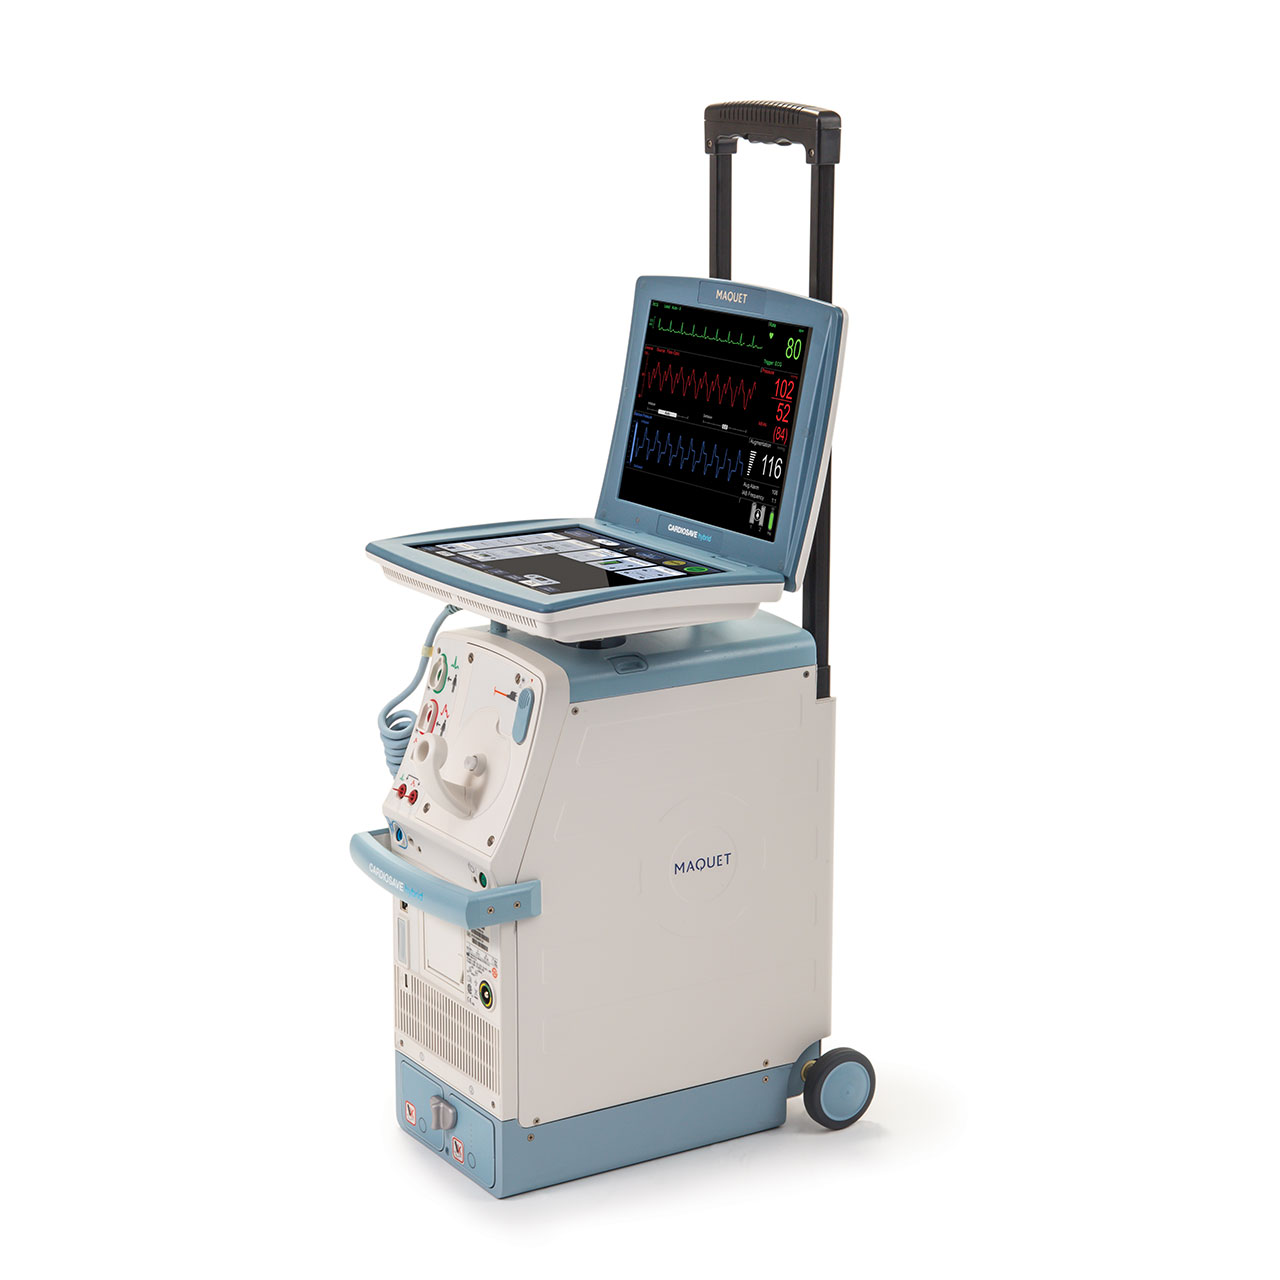 Cardiosave Intra-Aortic Balloon Pump Resuce is smallest and lightest balloon pump  available for transport applications to provide mechanical circulatory support